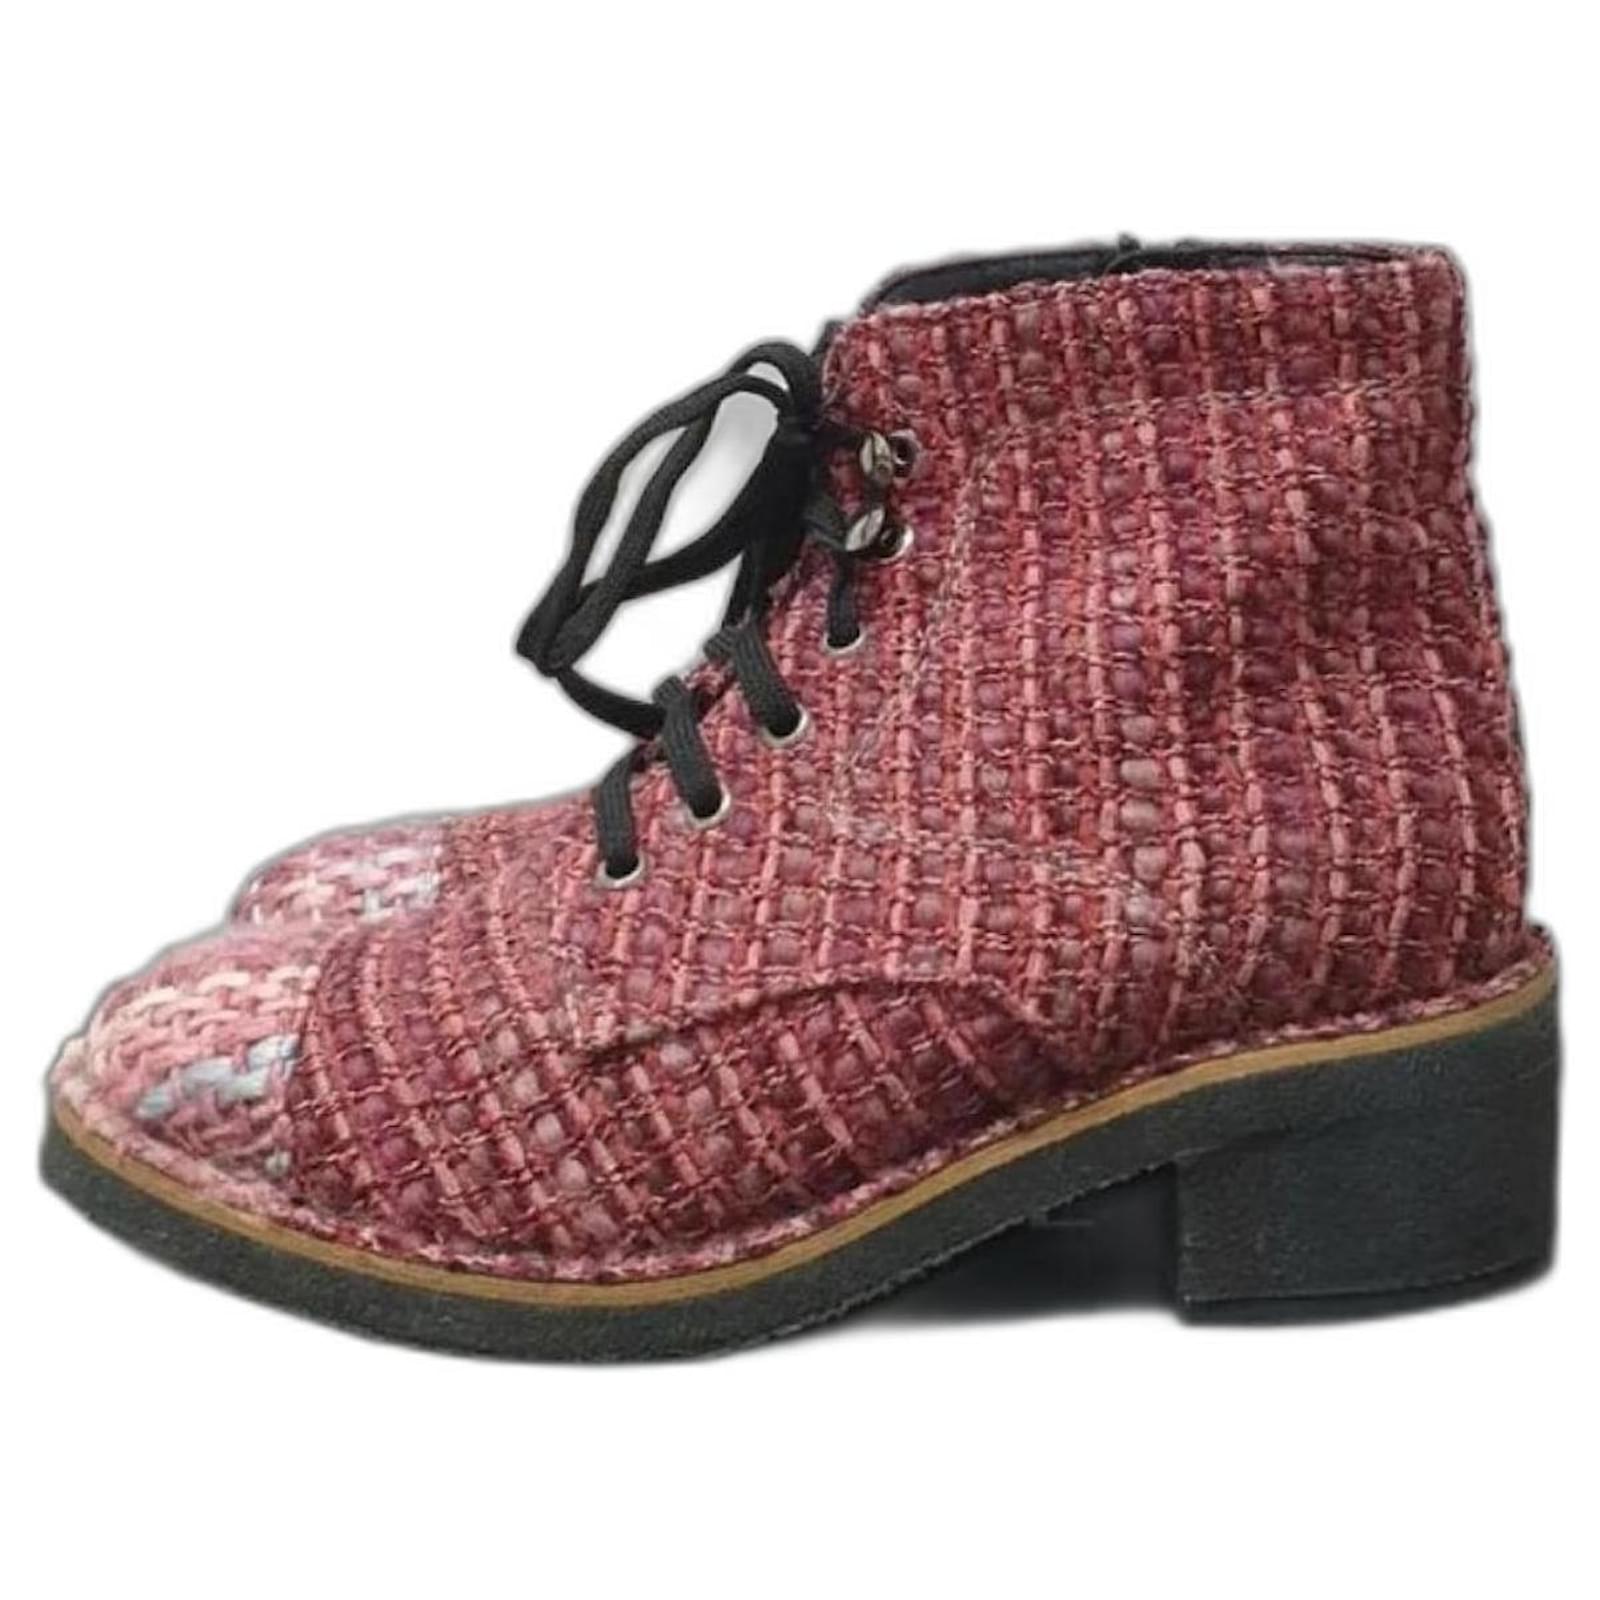 Ankle Boots Chanel Chanel Burgundy Tweed Lace Up Ankle Boots Size 38.5 FR